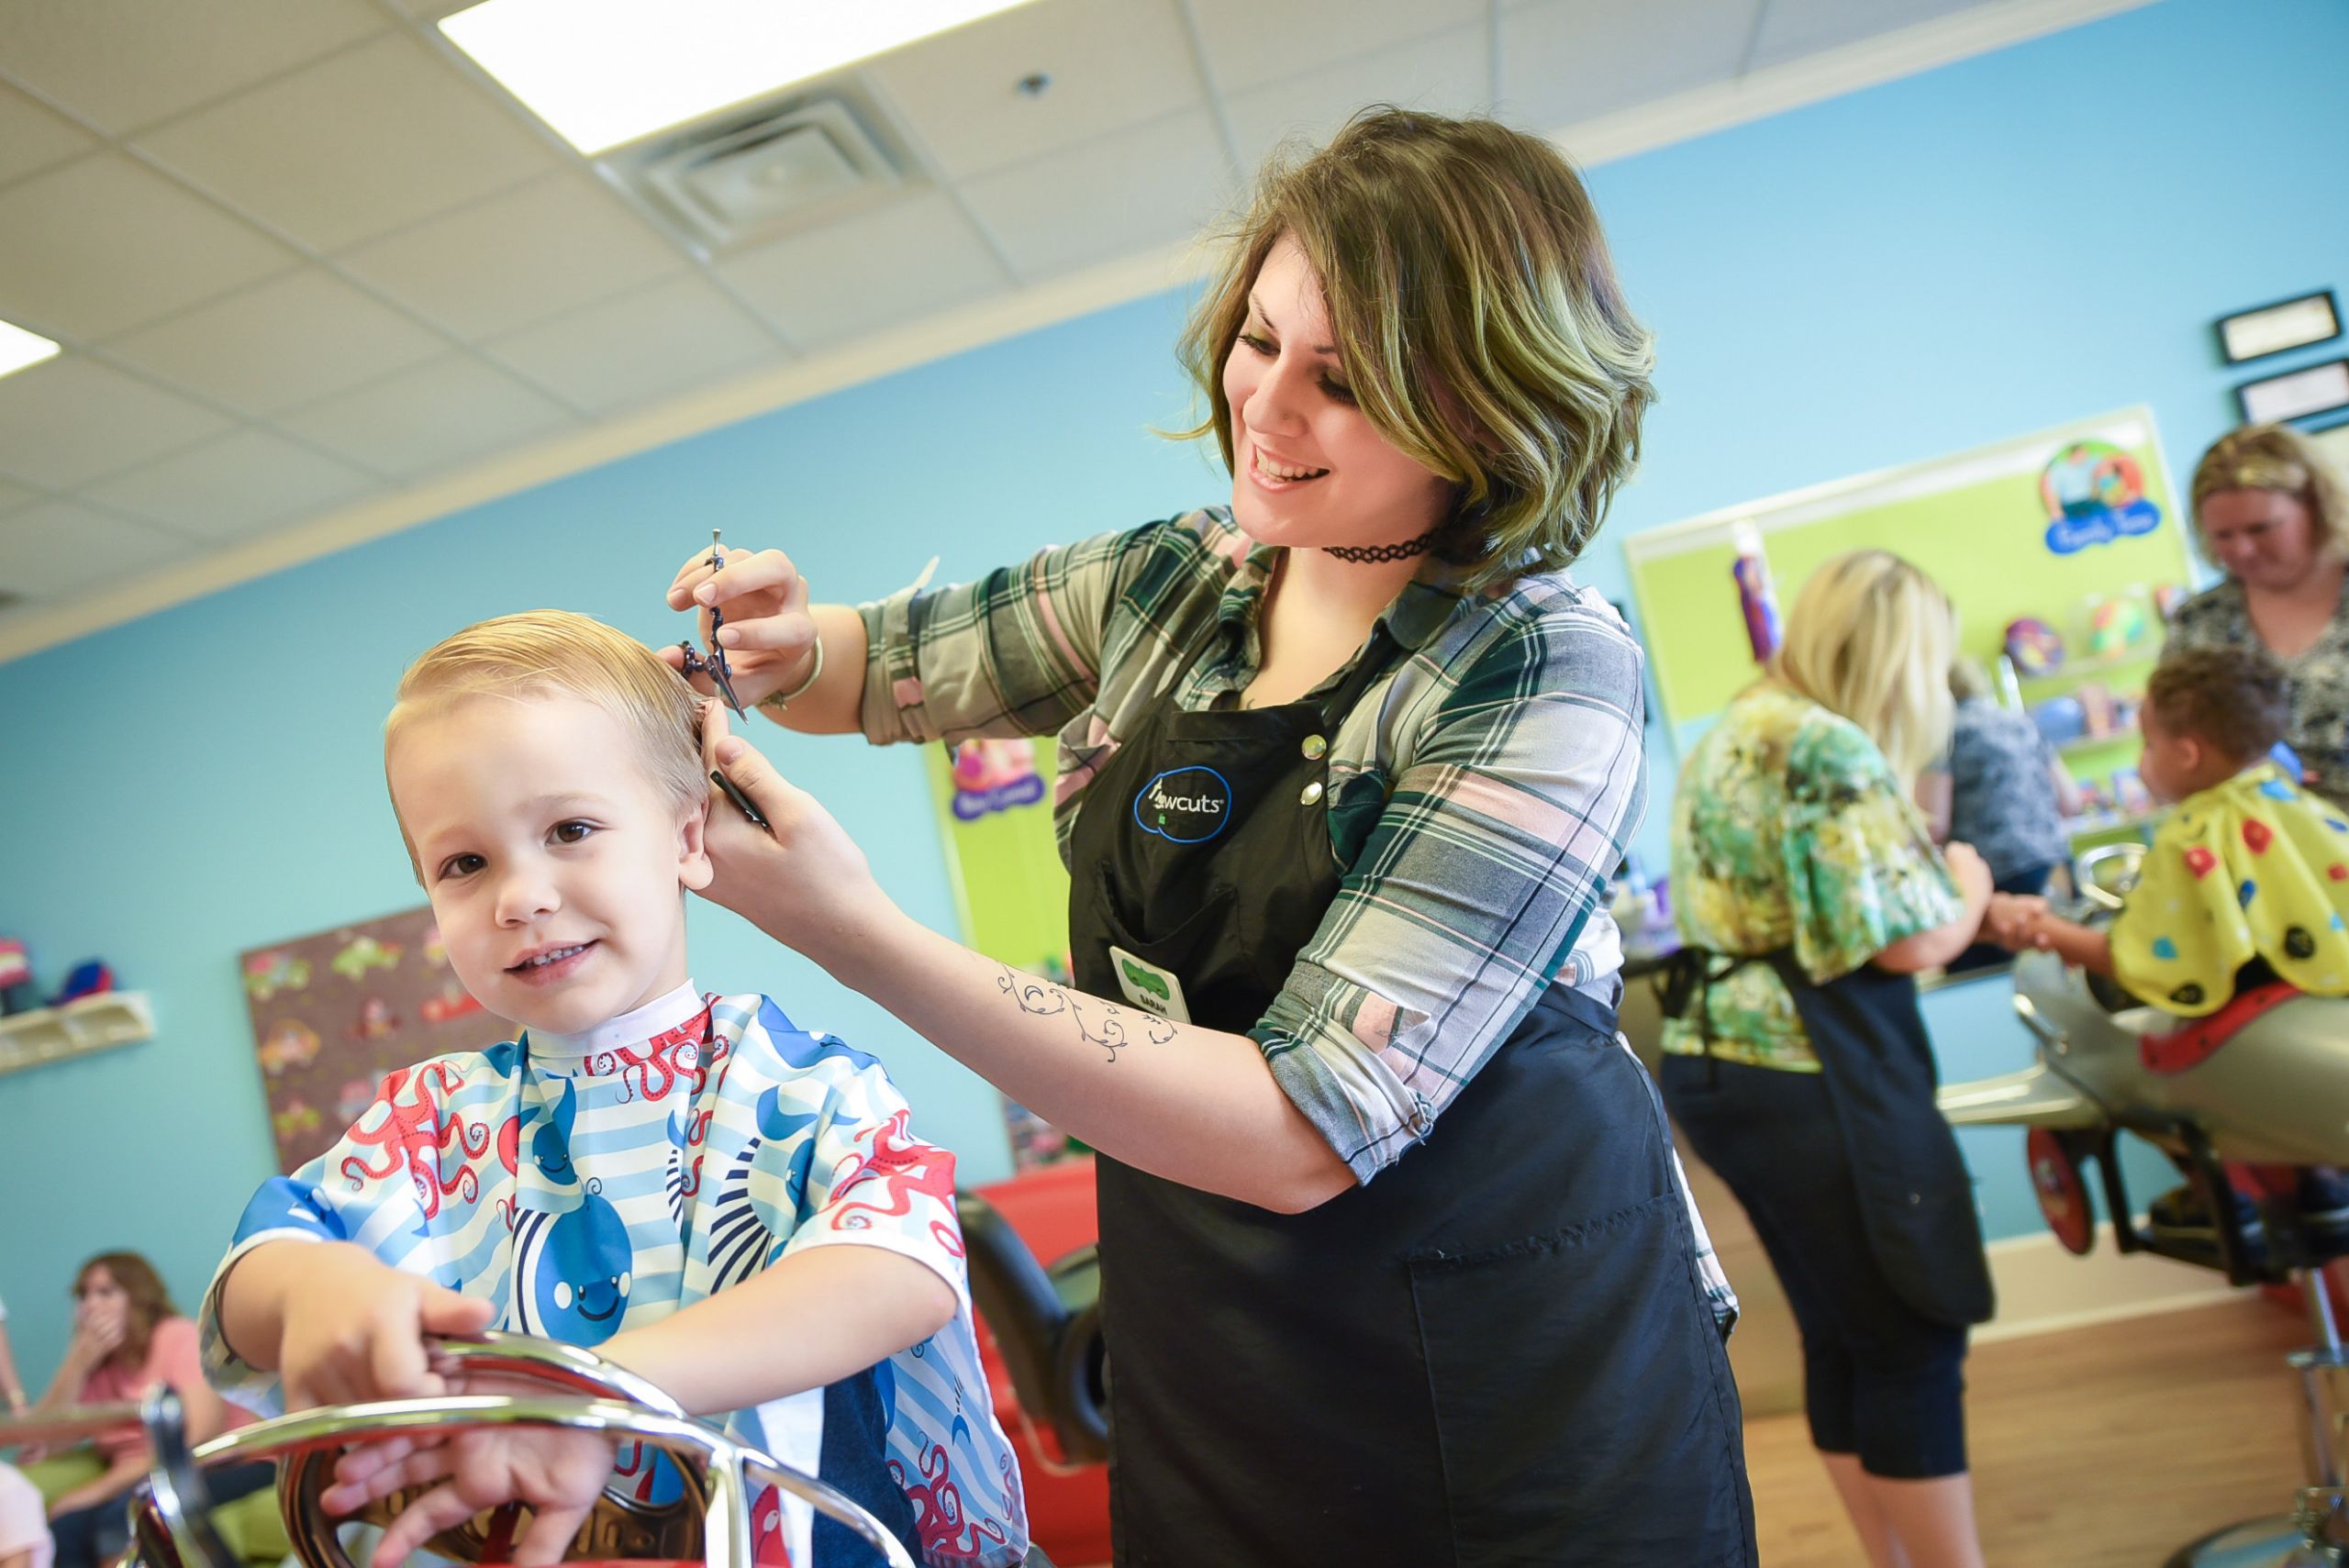 Kids Haircuts Orlando
 Haircuts for Kids Pigtails & Crewcuts